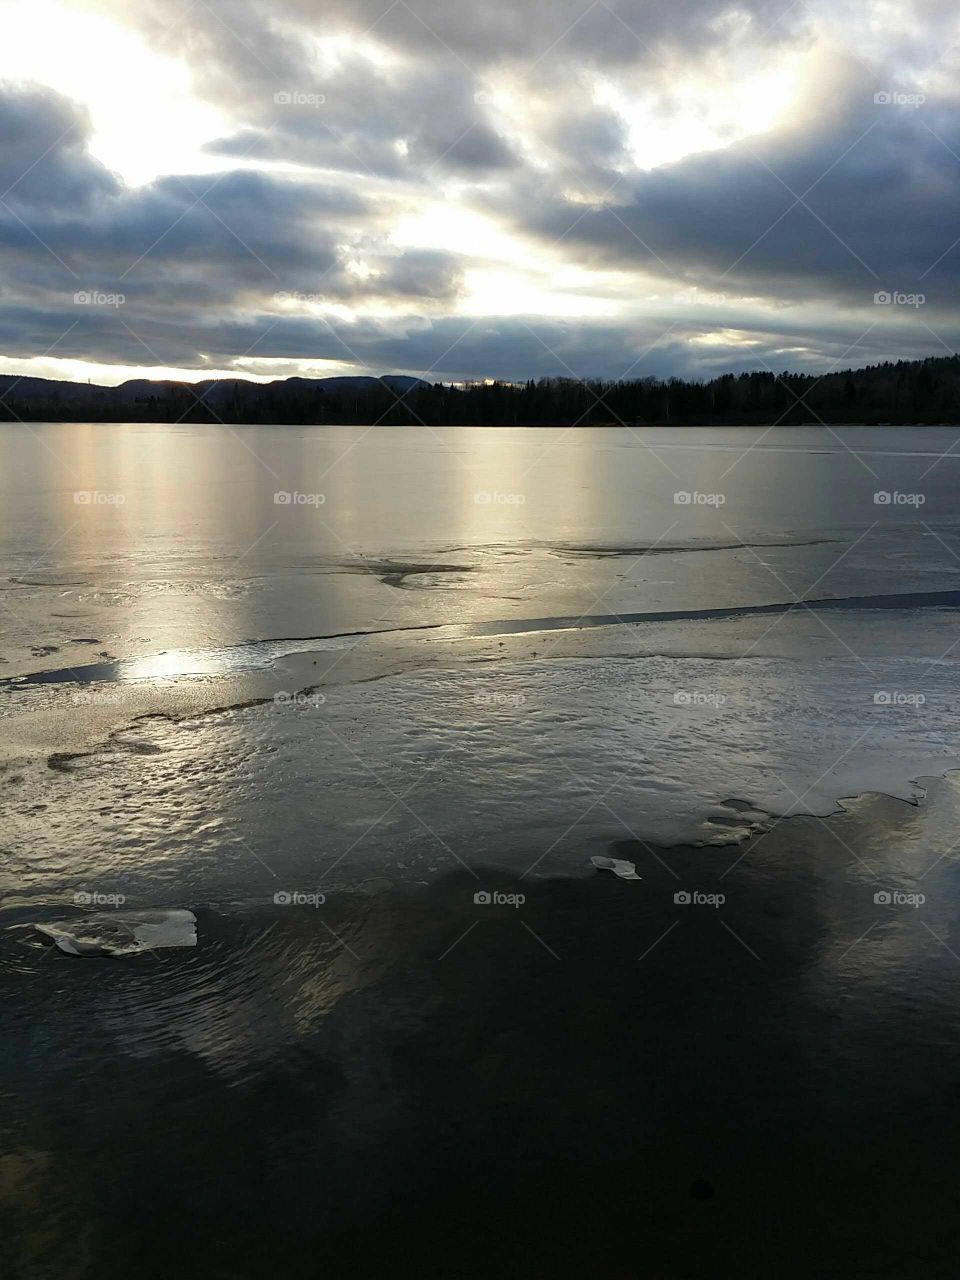 View of a lake covered with ice at sundown with mountains